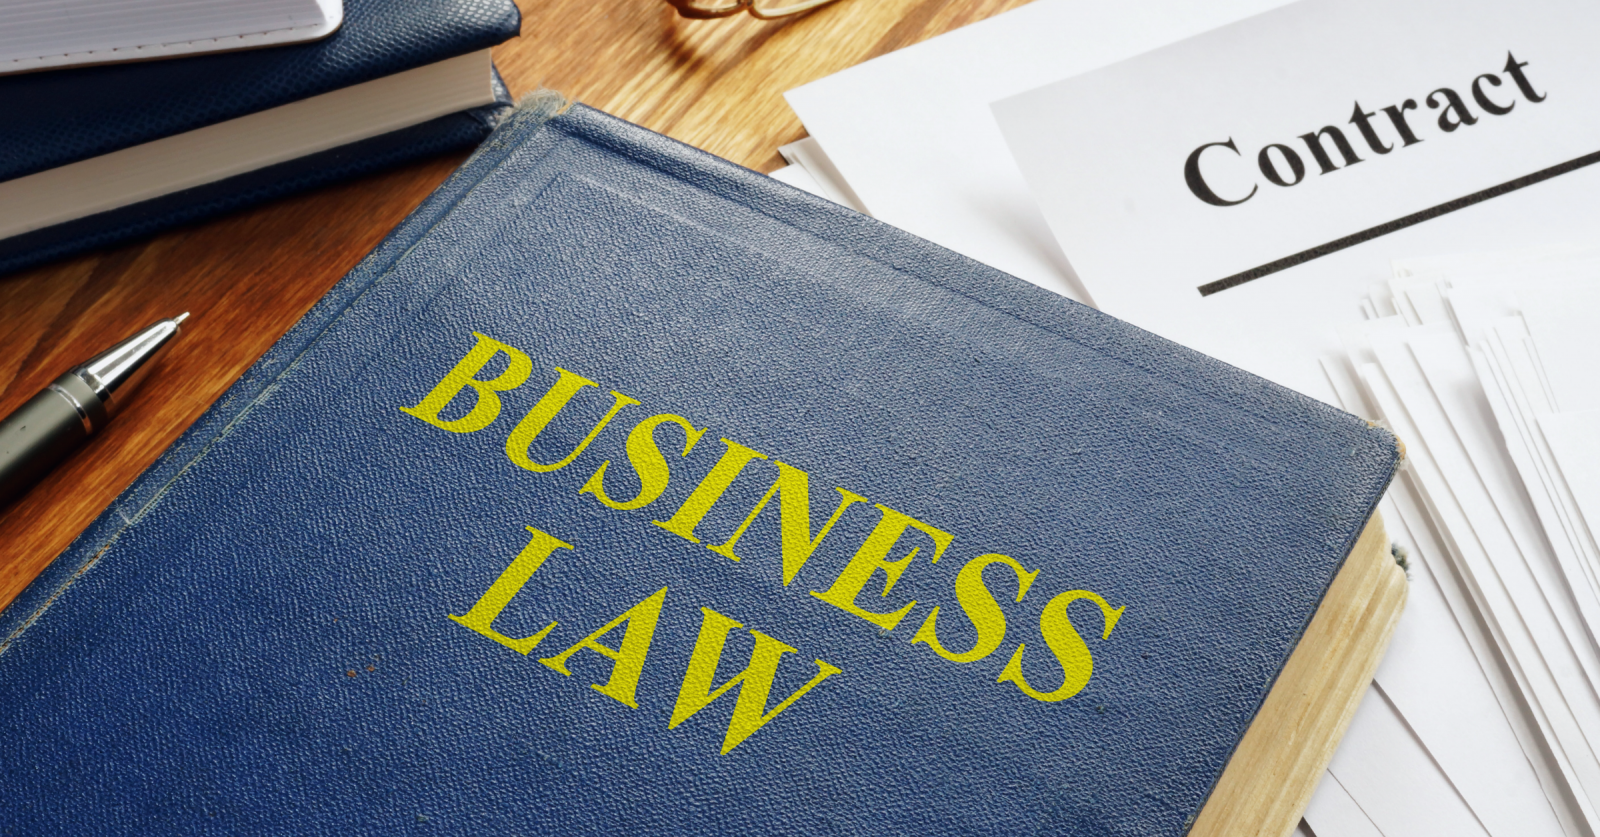 Business Law Langley